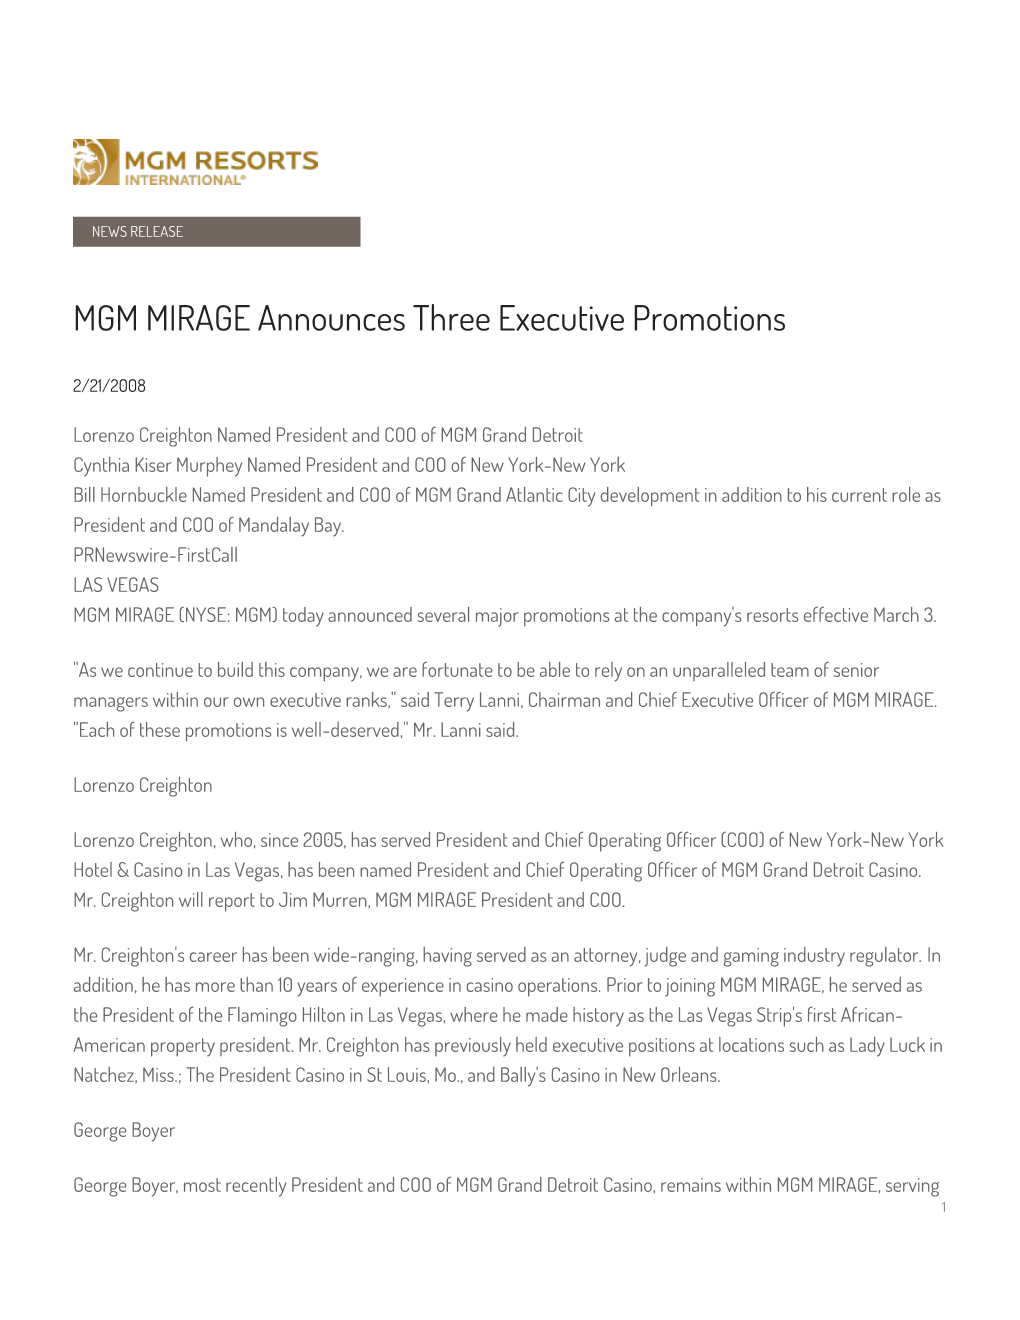 MGM MIRAGE Announces Three Executive Promotions